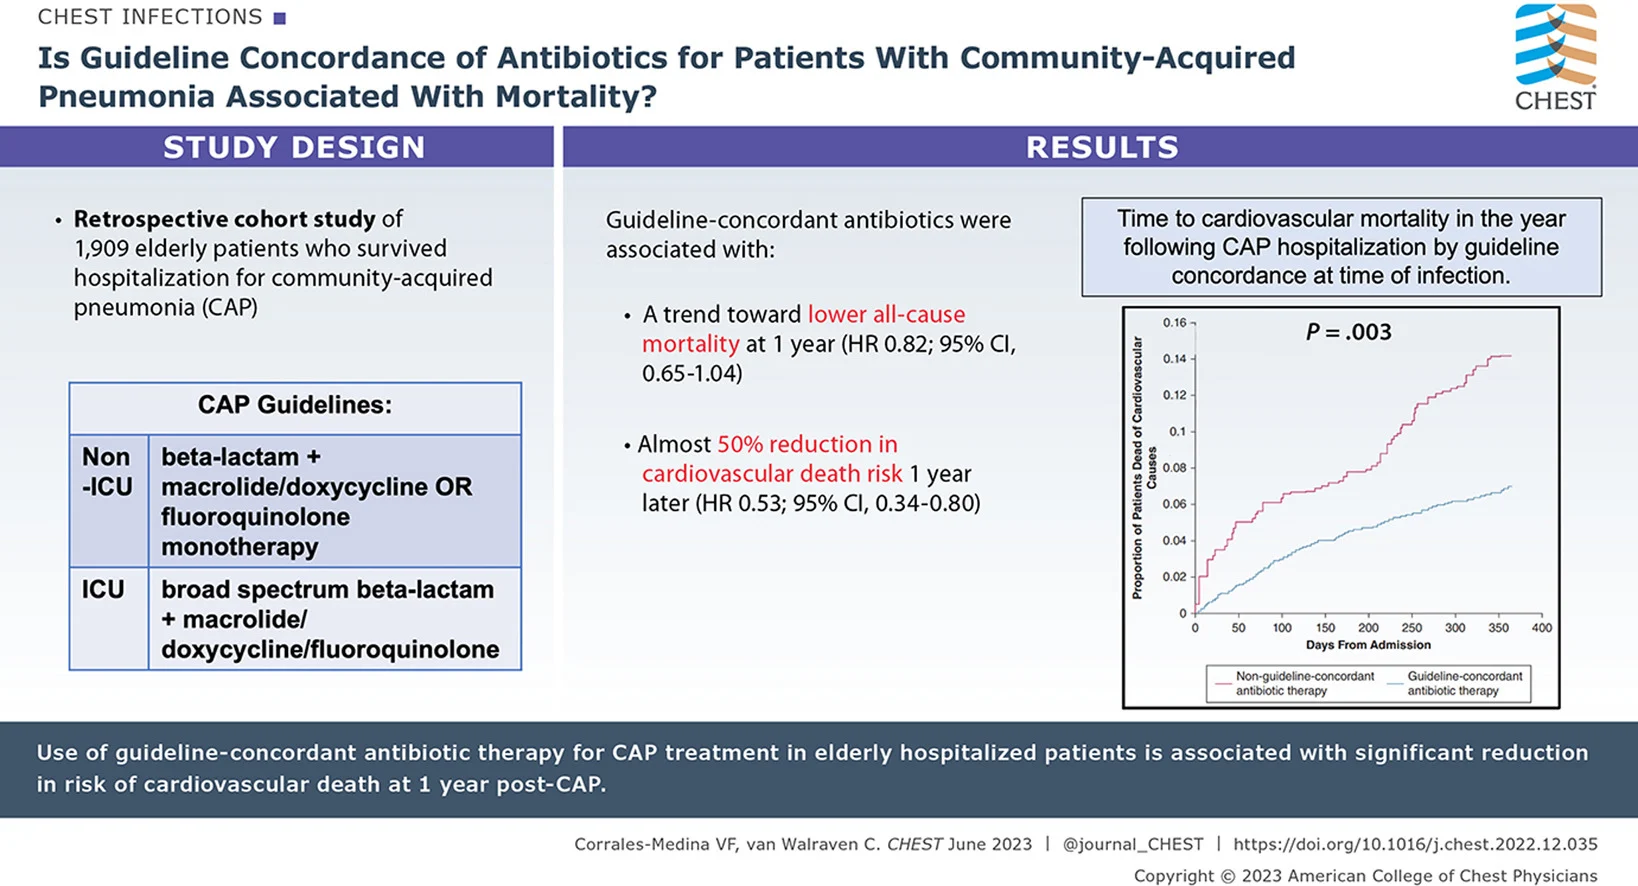 Is Guideline Concordance of Antibiotics for Patients